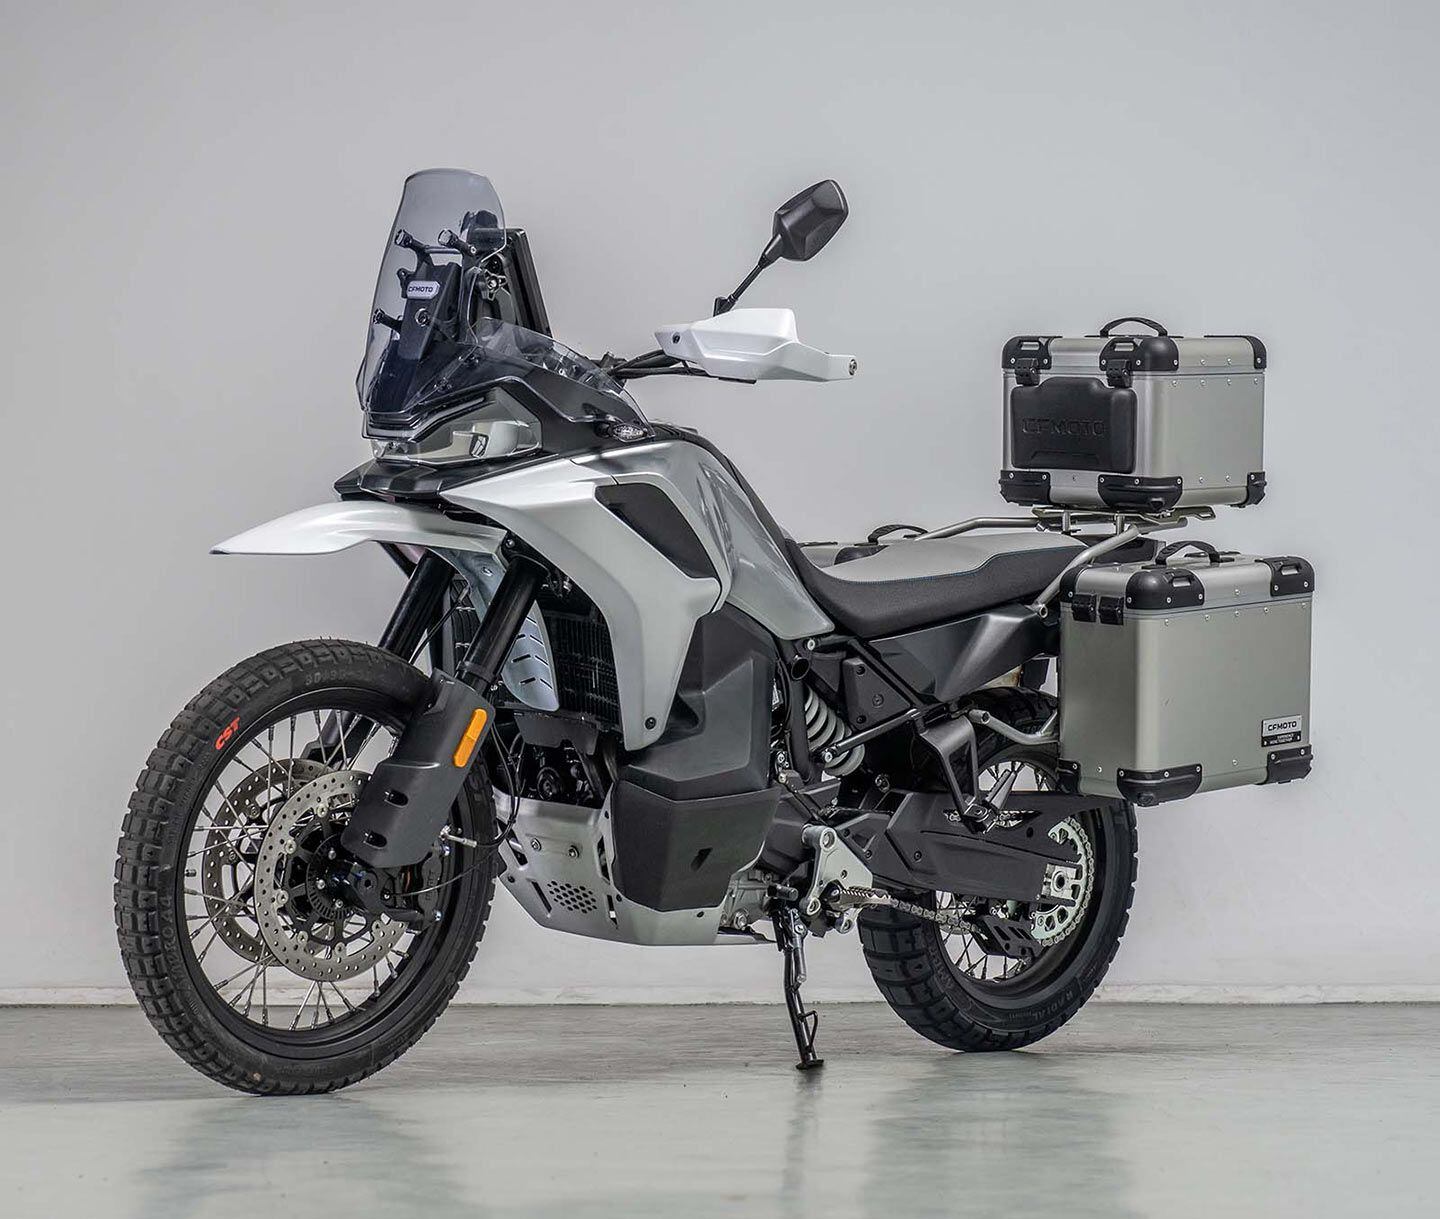 This version has the high fender, aluminum luggage, and a taller windscreen.